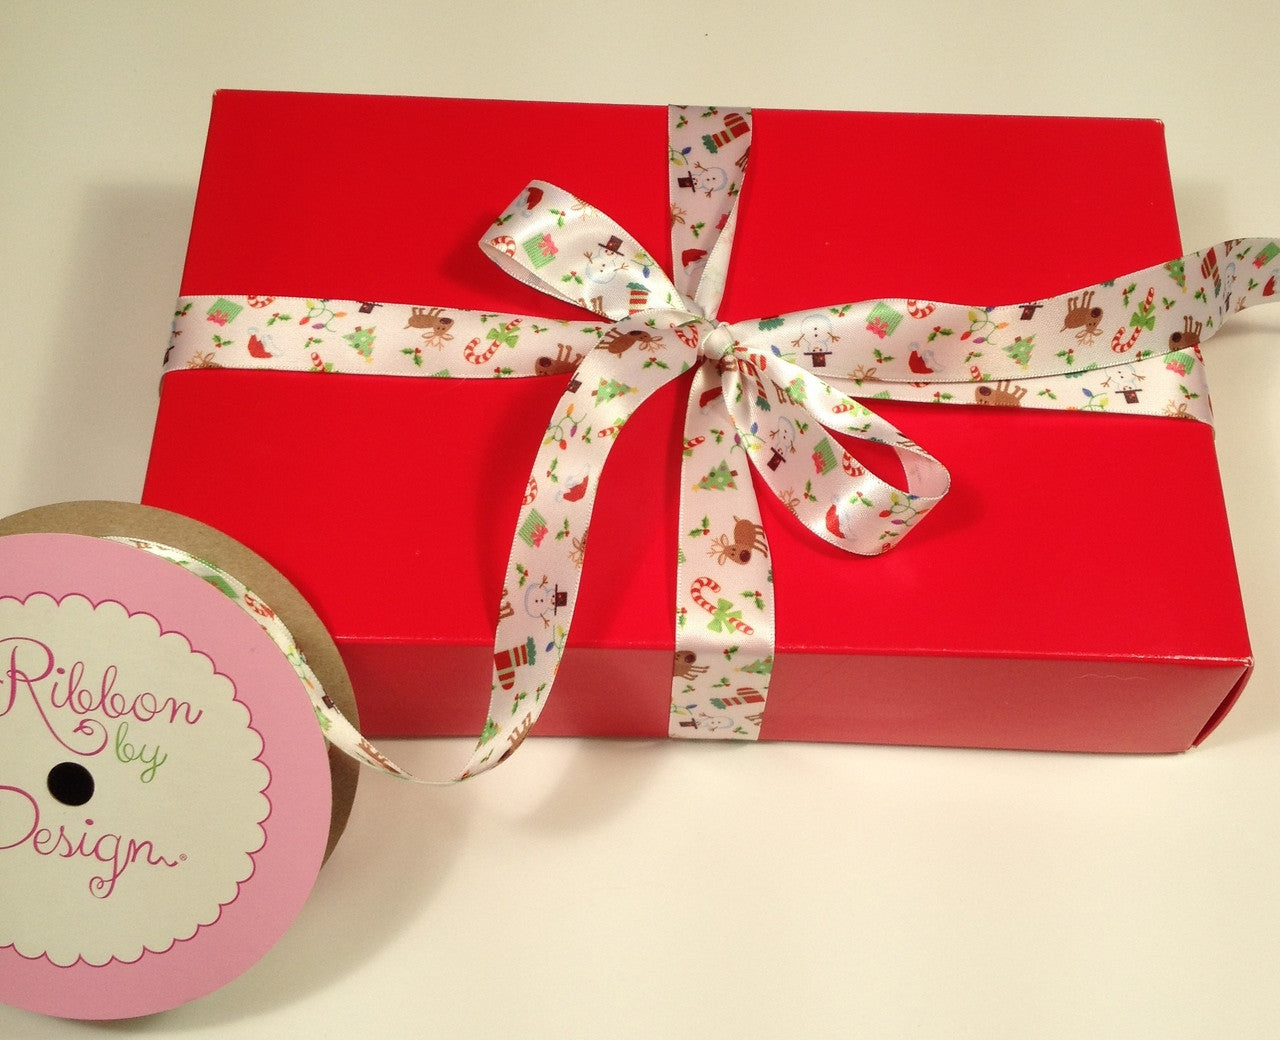 A red box tied with Christmas All Around is a wonderful gift for anyone!